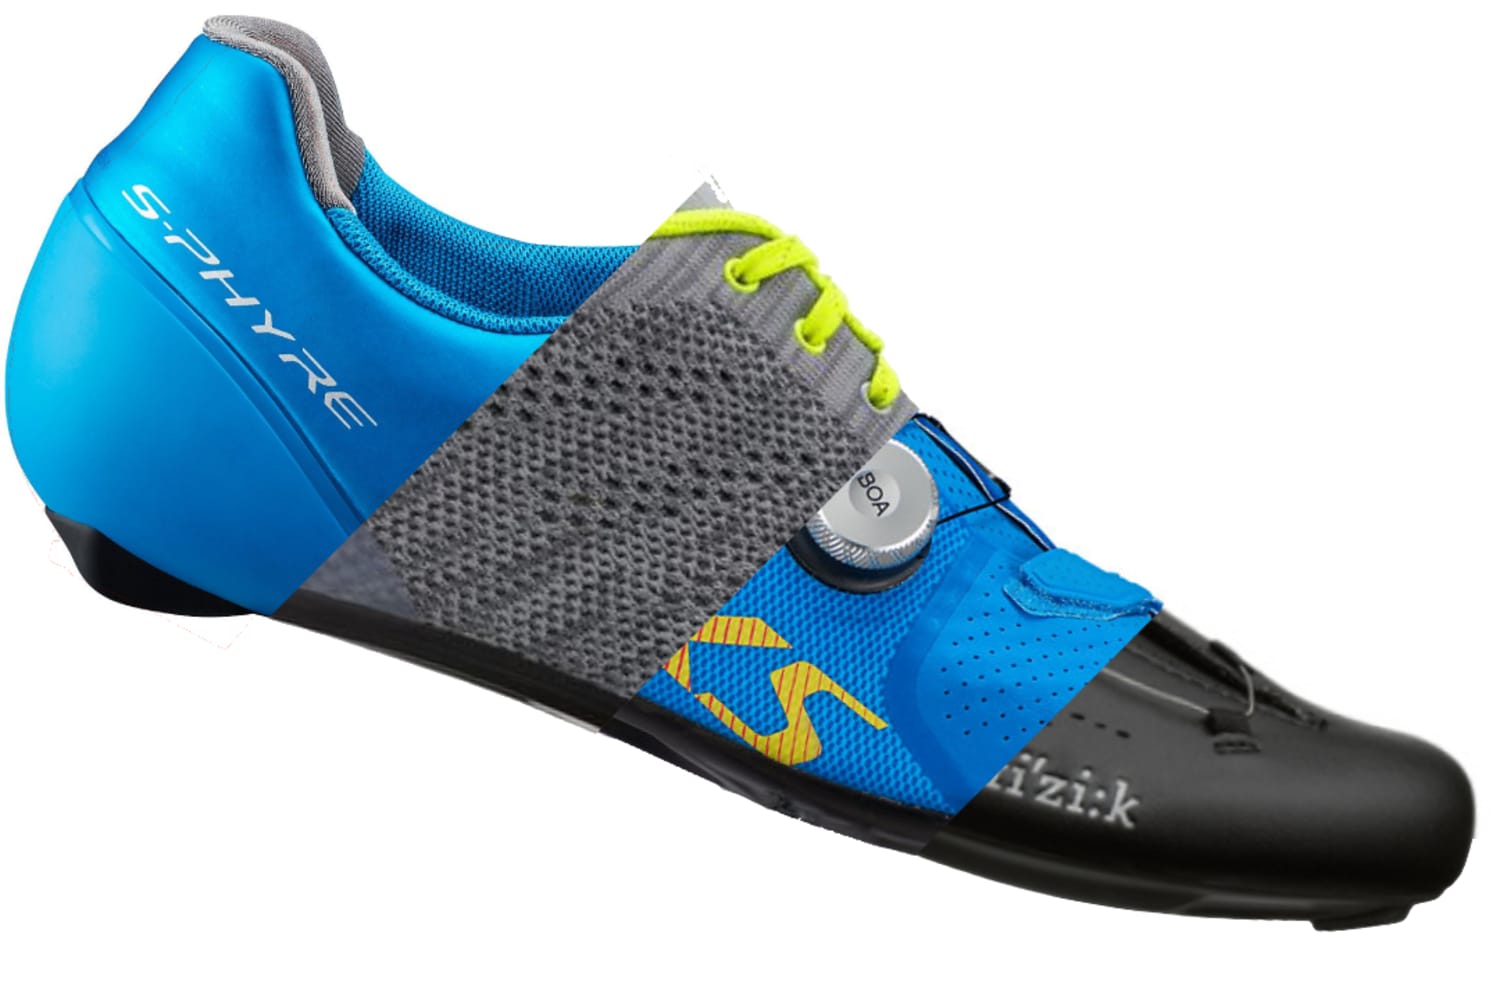 affordable cycling shoes